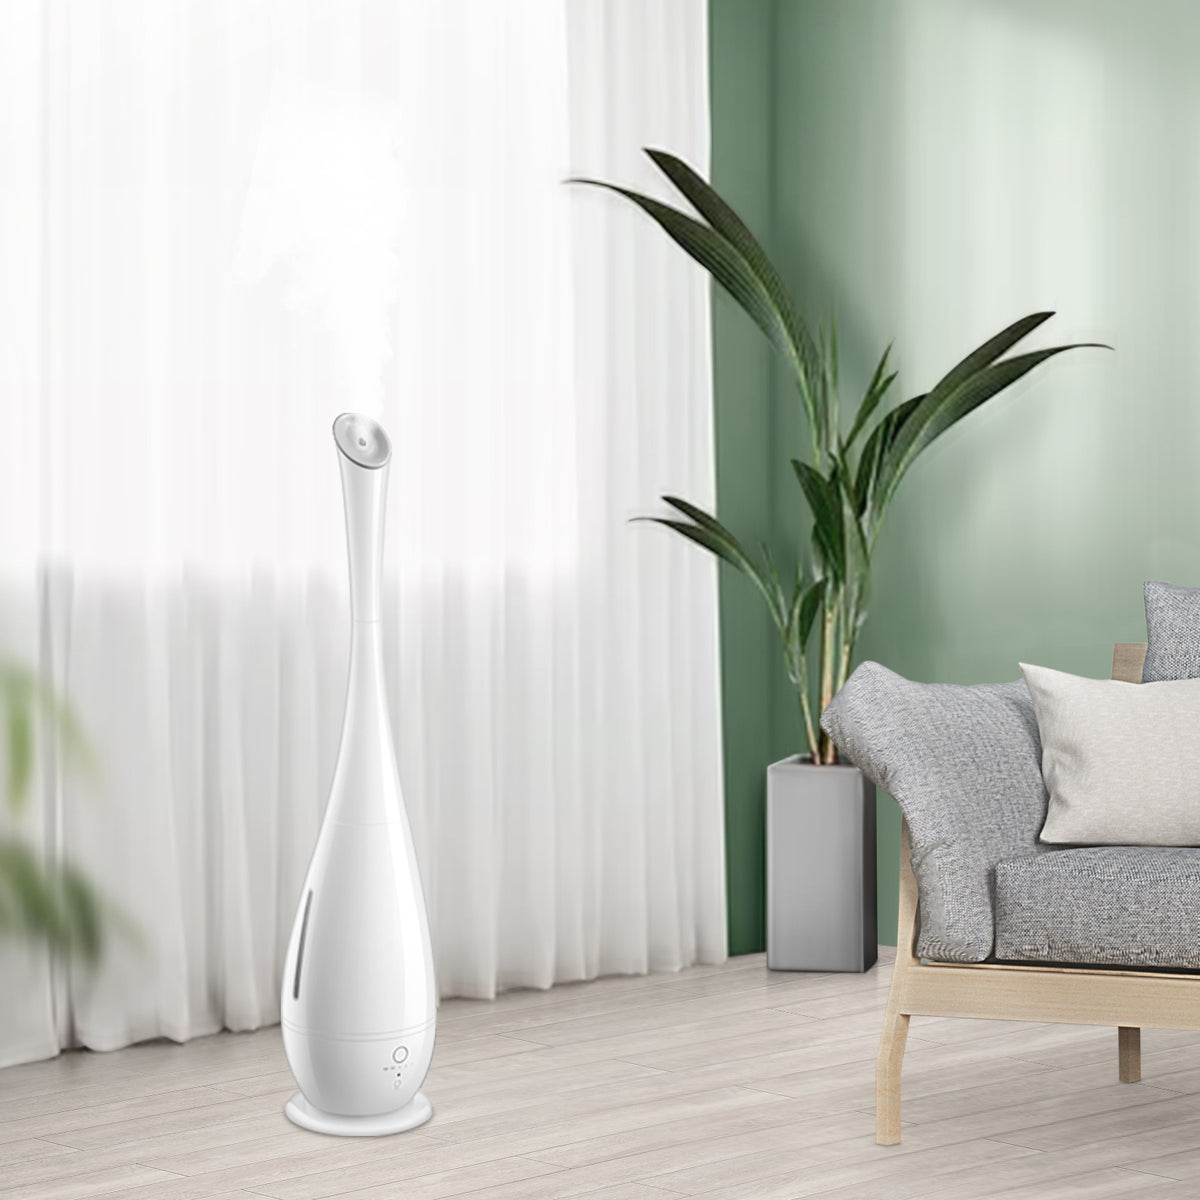 iTvanila Smart Cool Mist Humidifiers for Covid, Large Room Use, 5L Floor Humidifiers for Bedroom Office with Remote Control, Oil Diffuser Tray, Last up to 50 Hours